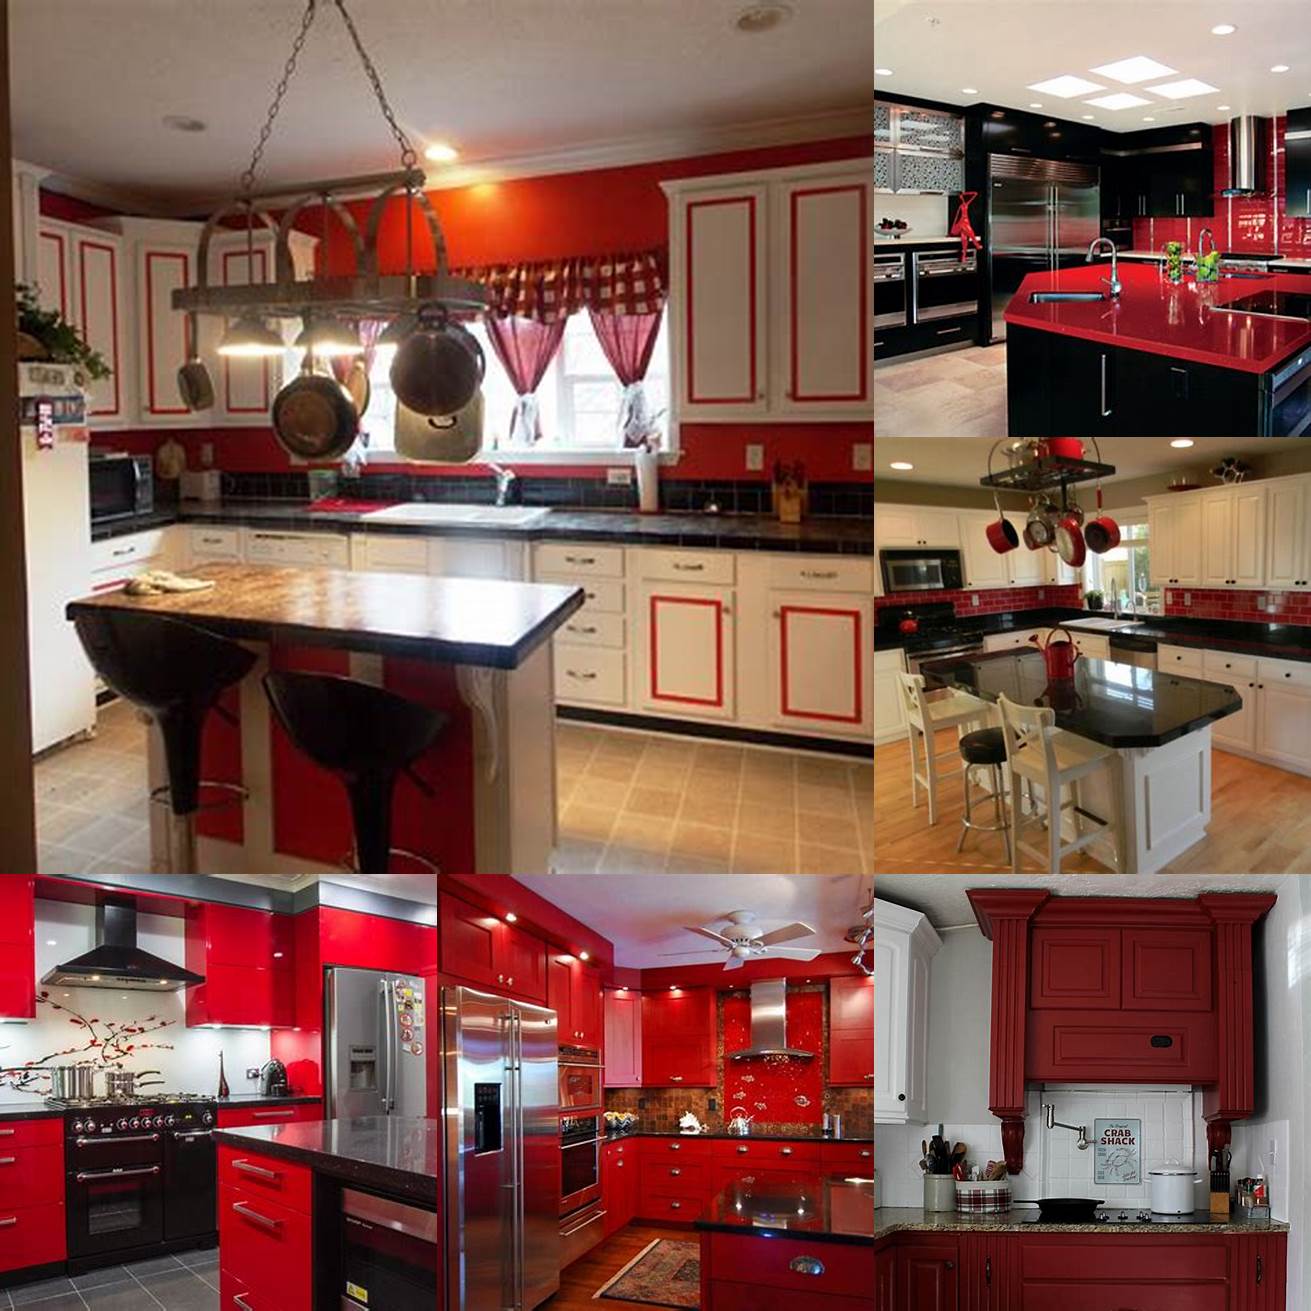 Red kitchen cabinets paired with a black and white mosaic tile backsplash